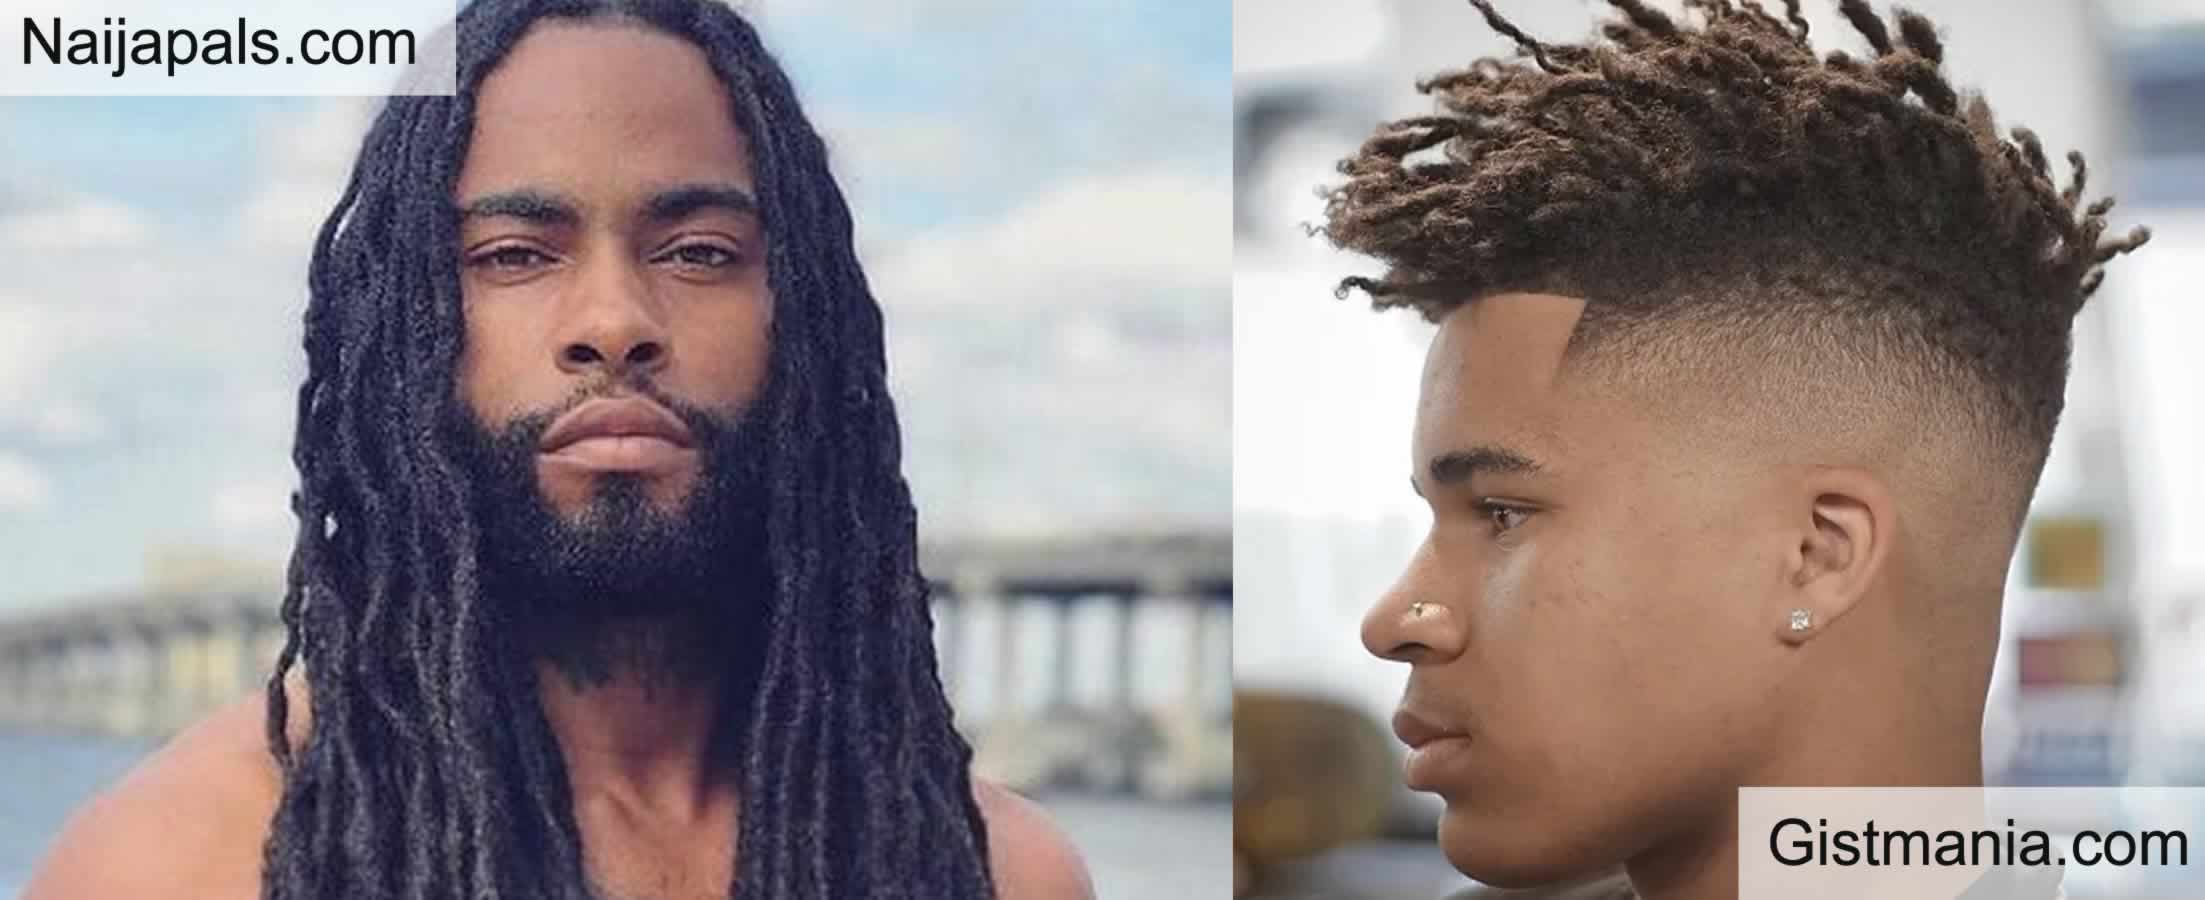 27 Dread Styles to Liven Up Your Look - StyleSeat